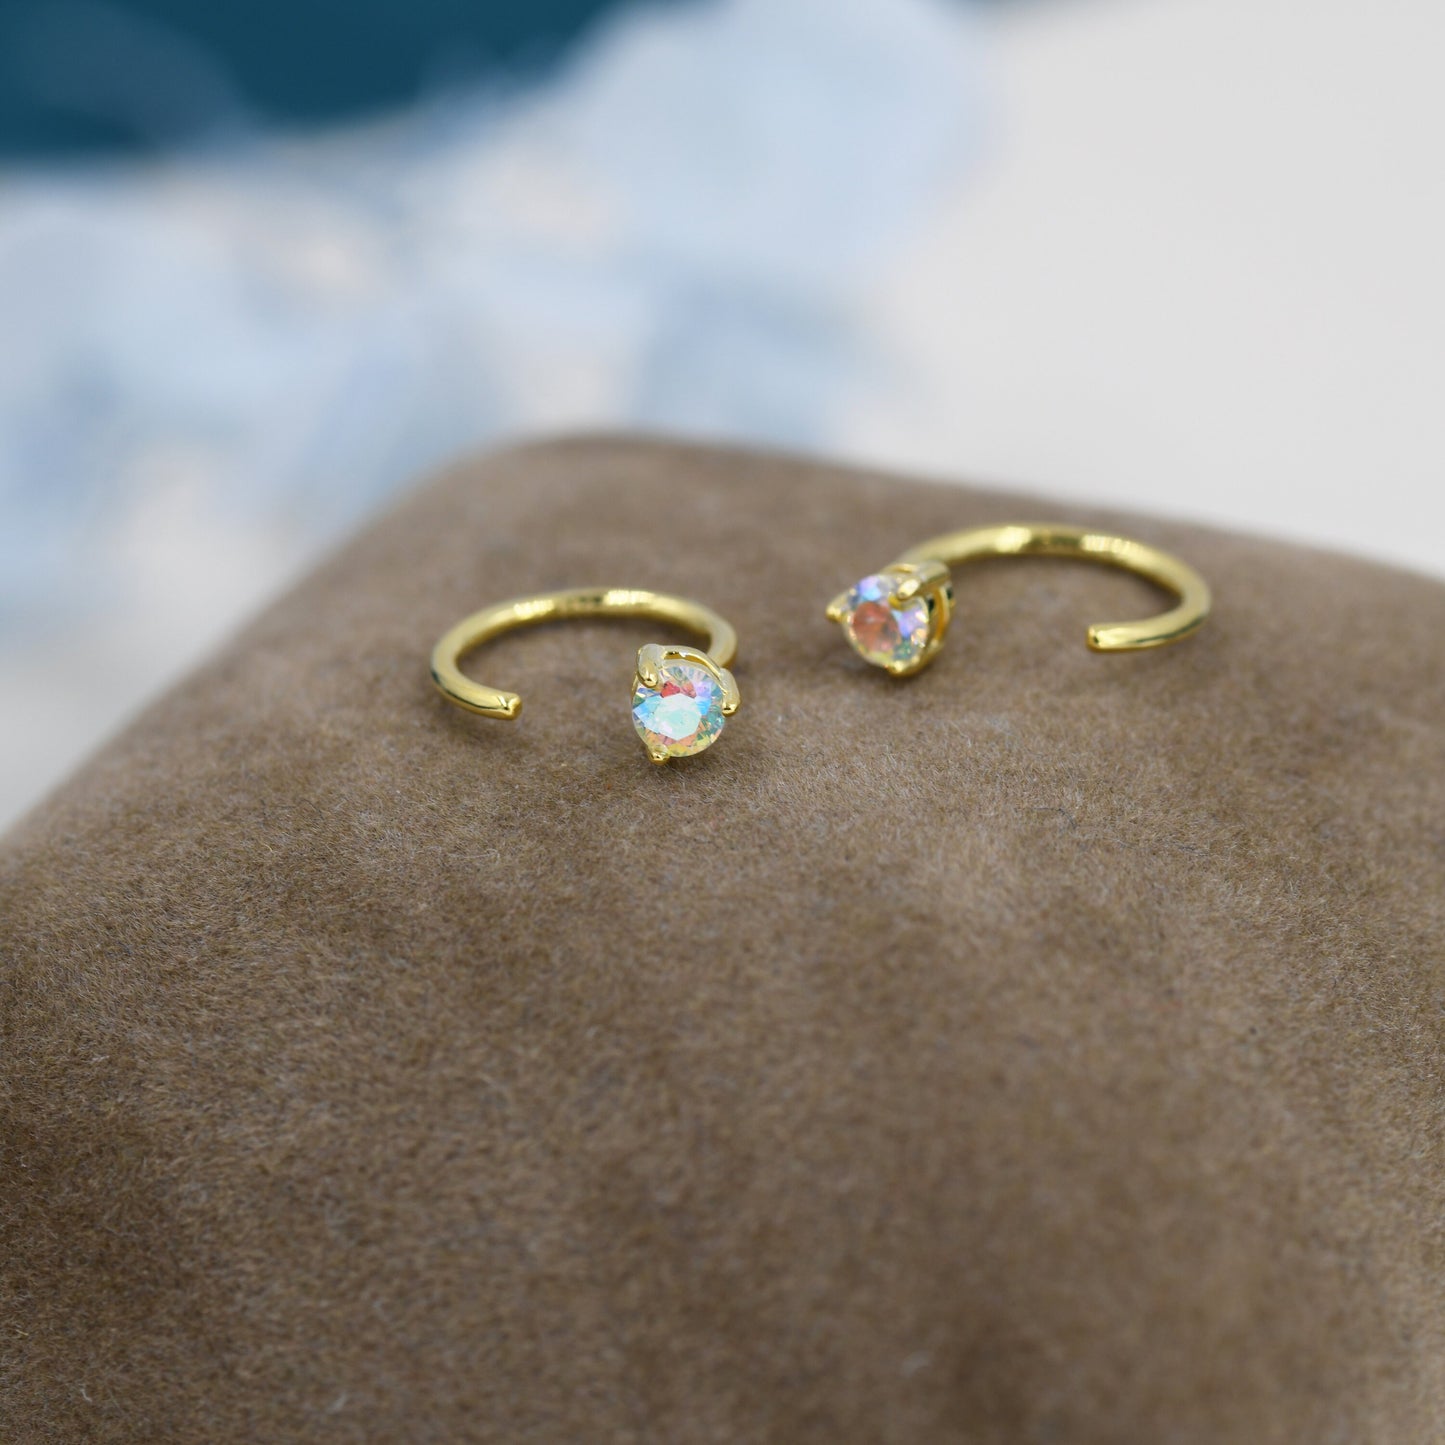 Aurora AB Crystal Tiny CZ Threader Hoop Earrings in Sterling Silver, Silver or Gold, Colour Changing Crystals, Open Hoop Earrings, Huggies